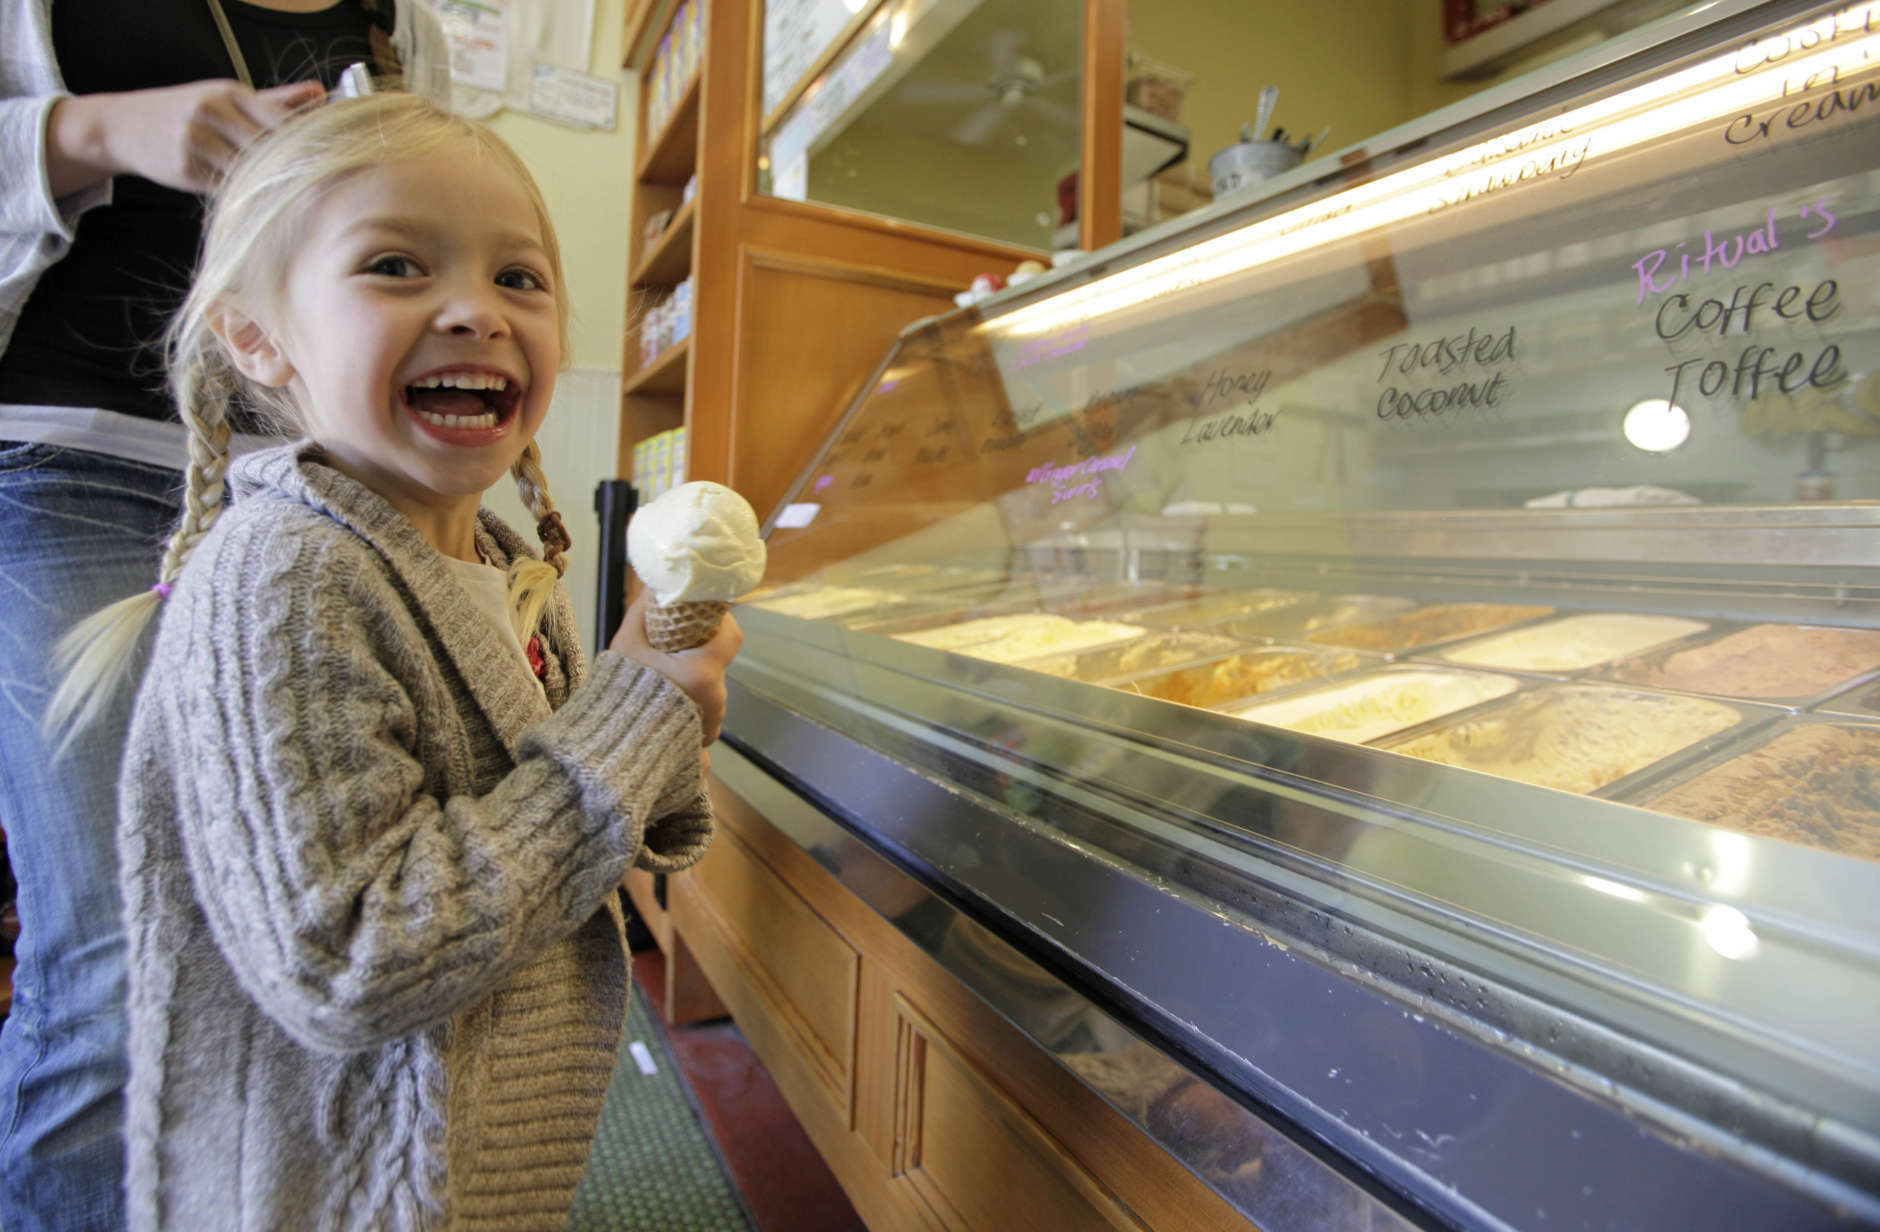 In this photo taken Wednesday June 1, 2011, Sophia Santos, 4, smiles after getting an ice cream cone at the Bi-Rite Creamery in San Francisco, Calif. At Bi-Rite Creamery, both their scooped and soft serve ice cream offerings are made from Straus Family Organic Dairy products.    (AP Photo/Eric Risberg)